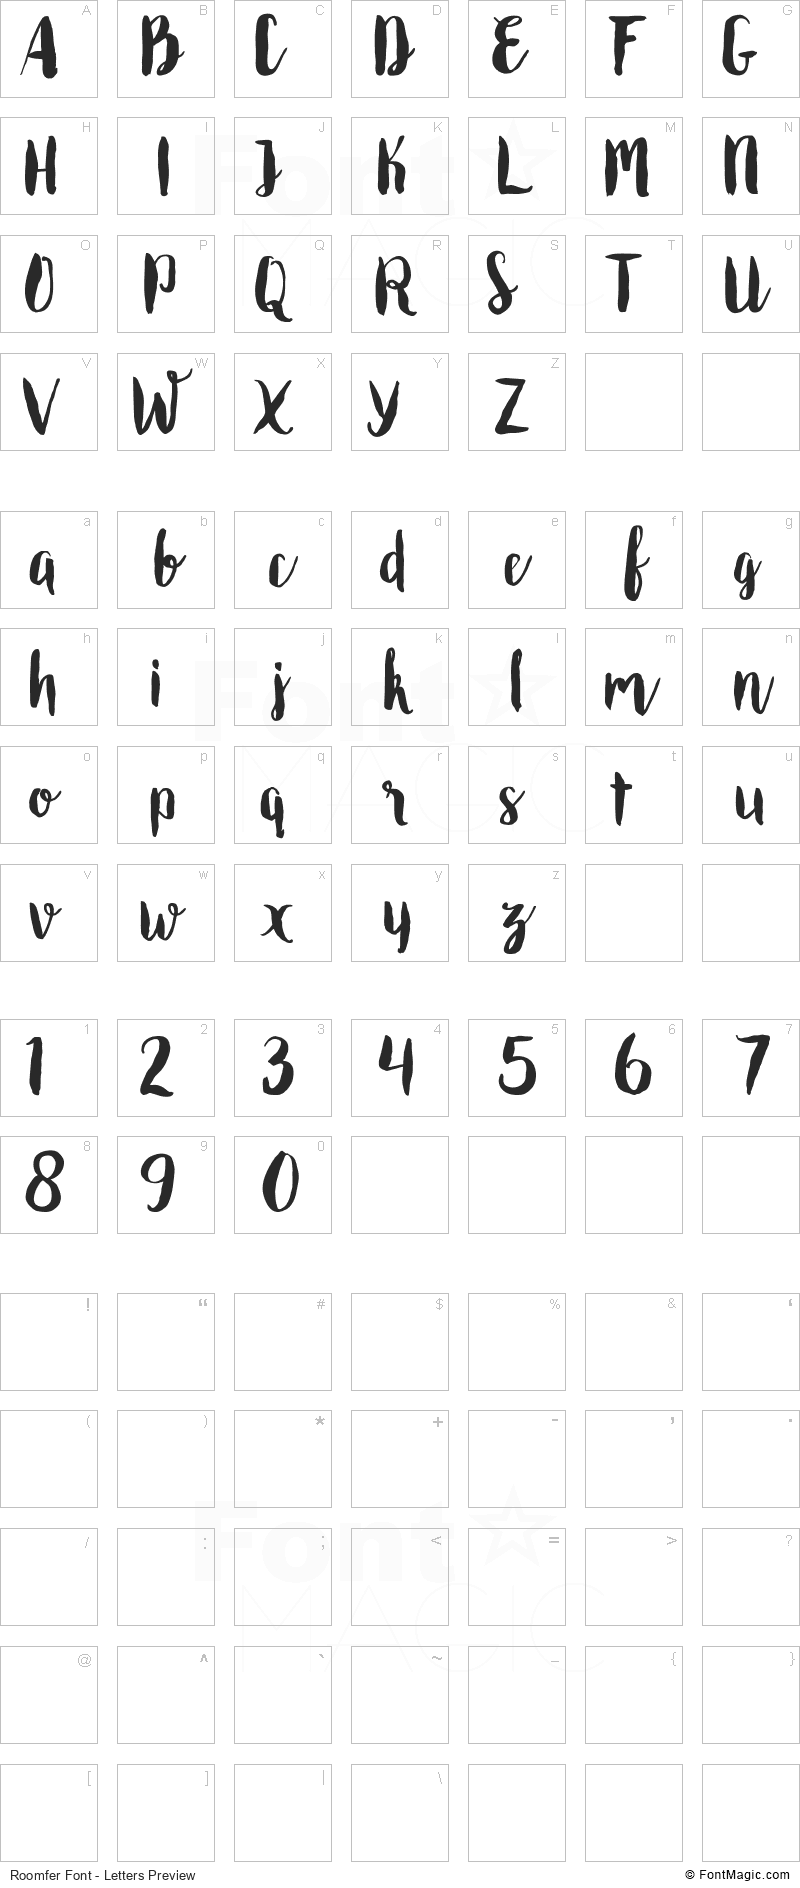 Roomfer Font - All Latters Preview Chart